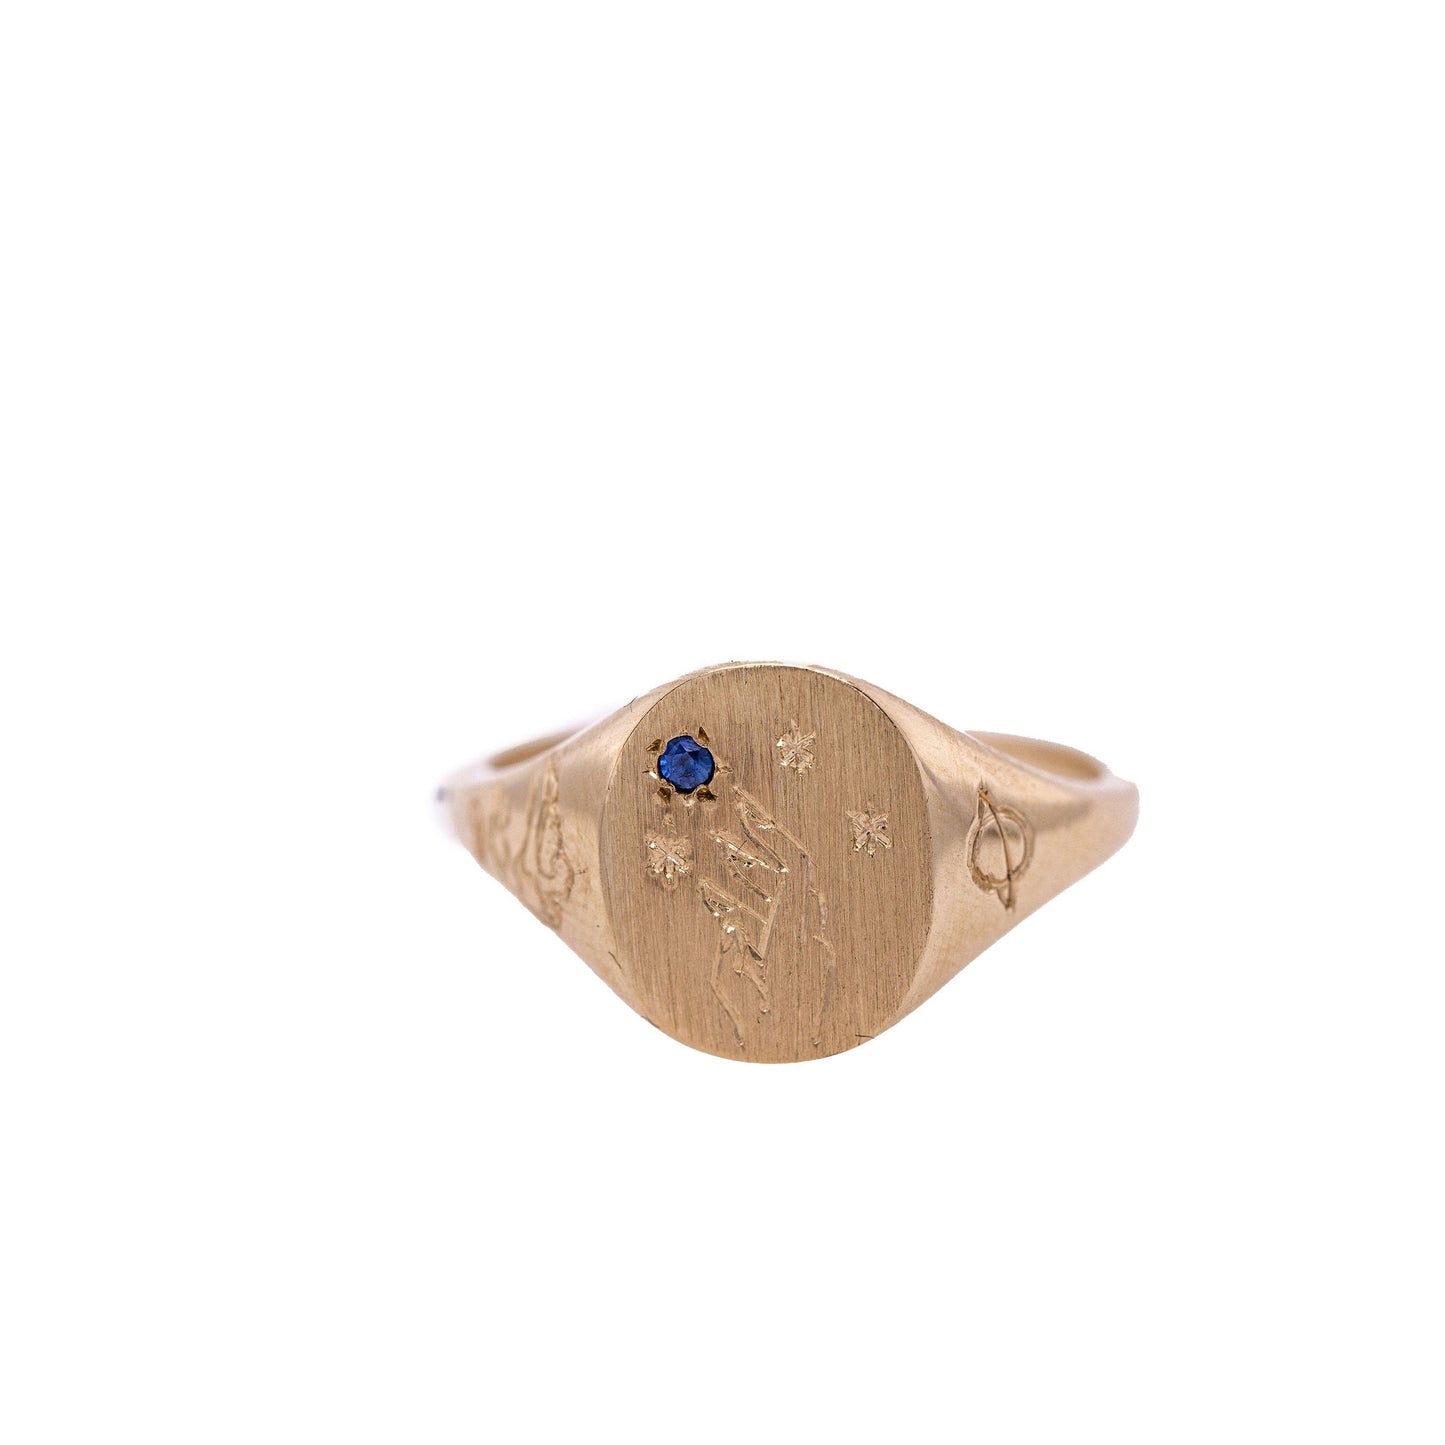 Sapphire Hand-engraved gold signet ring with intricate design on a clean white background